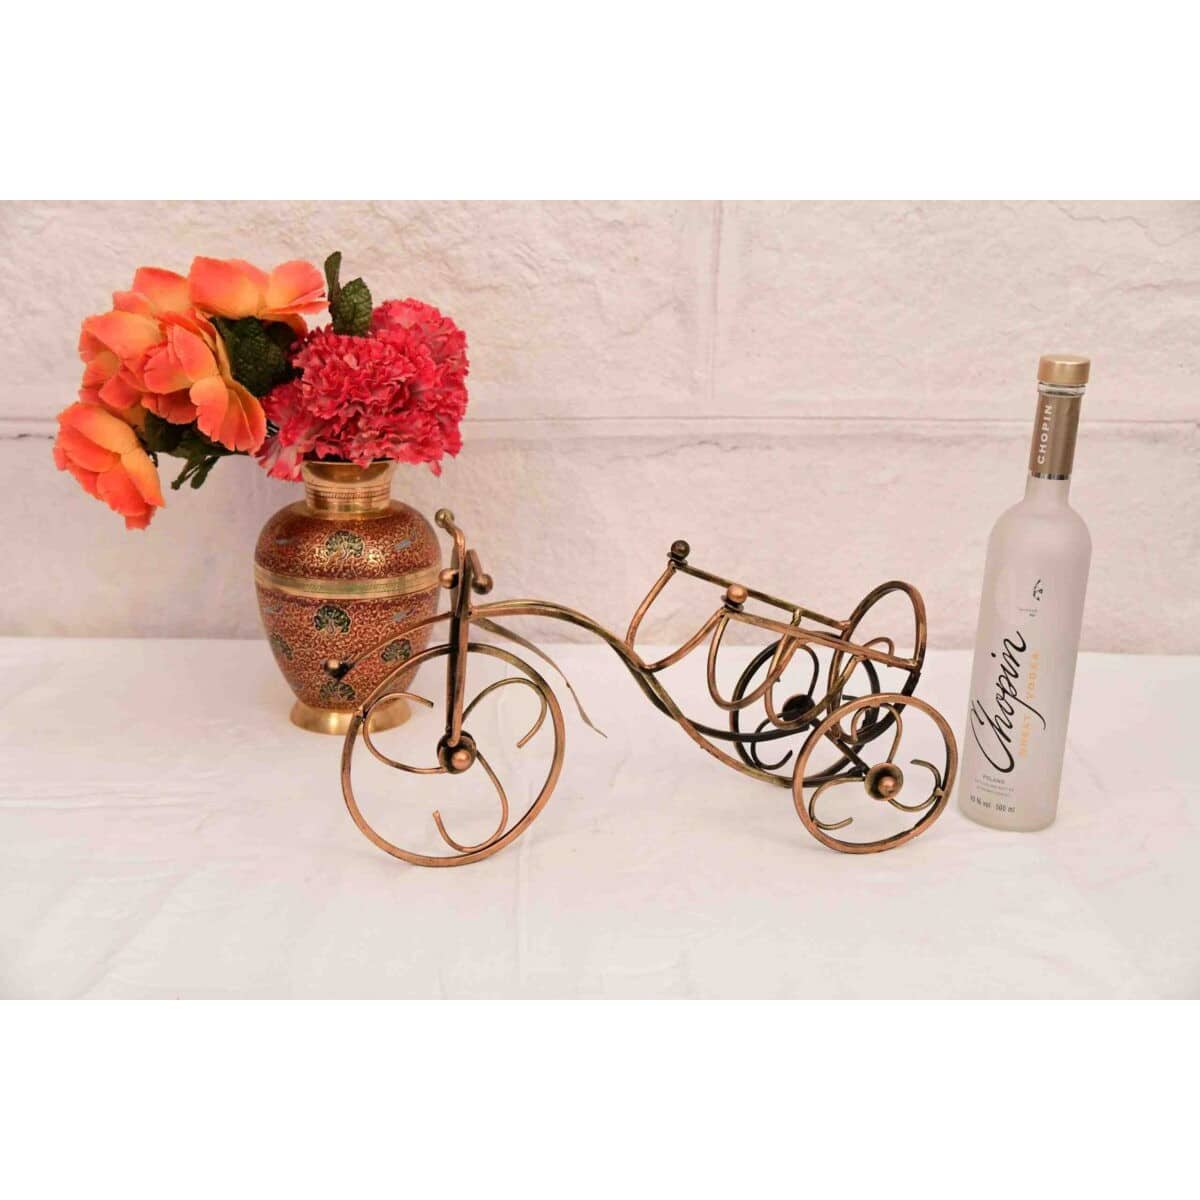 Retro Style Iron Made Bagghi with Worker Wine Bottle Holder  